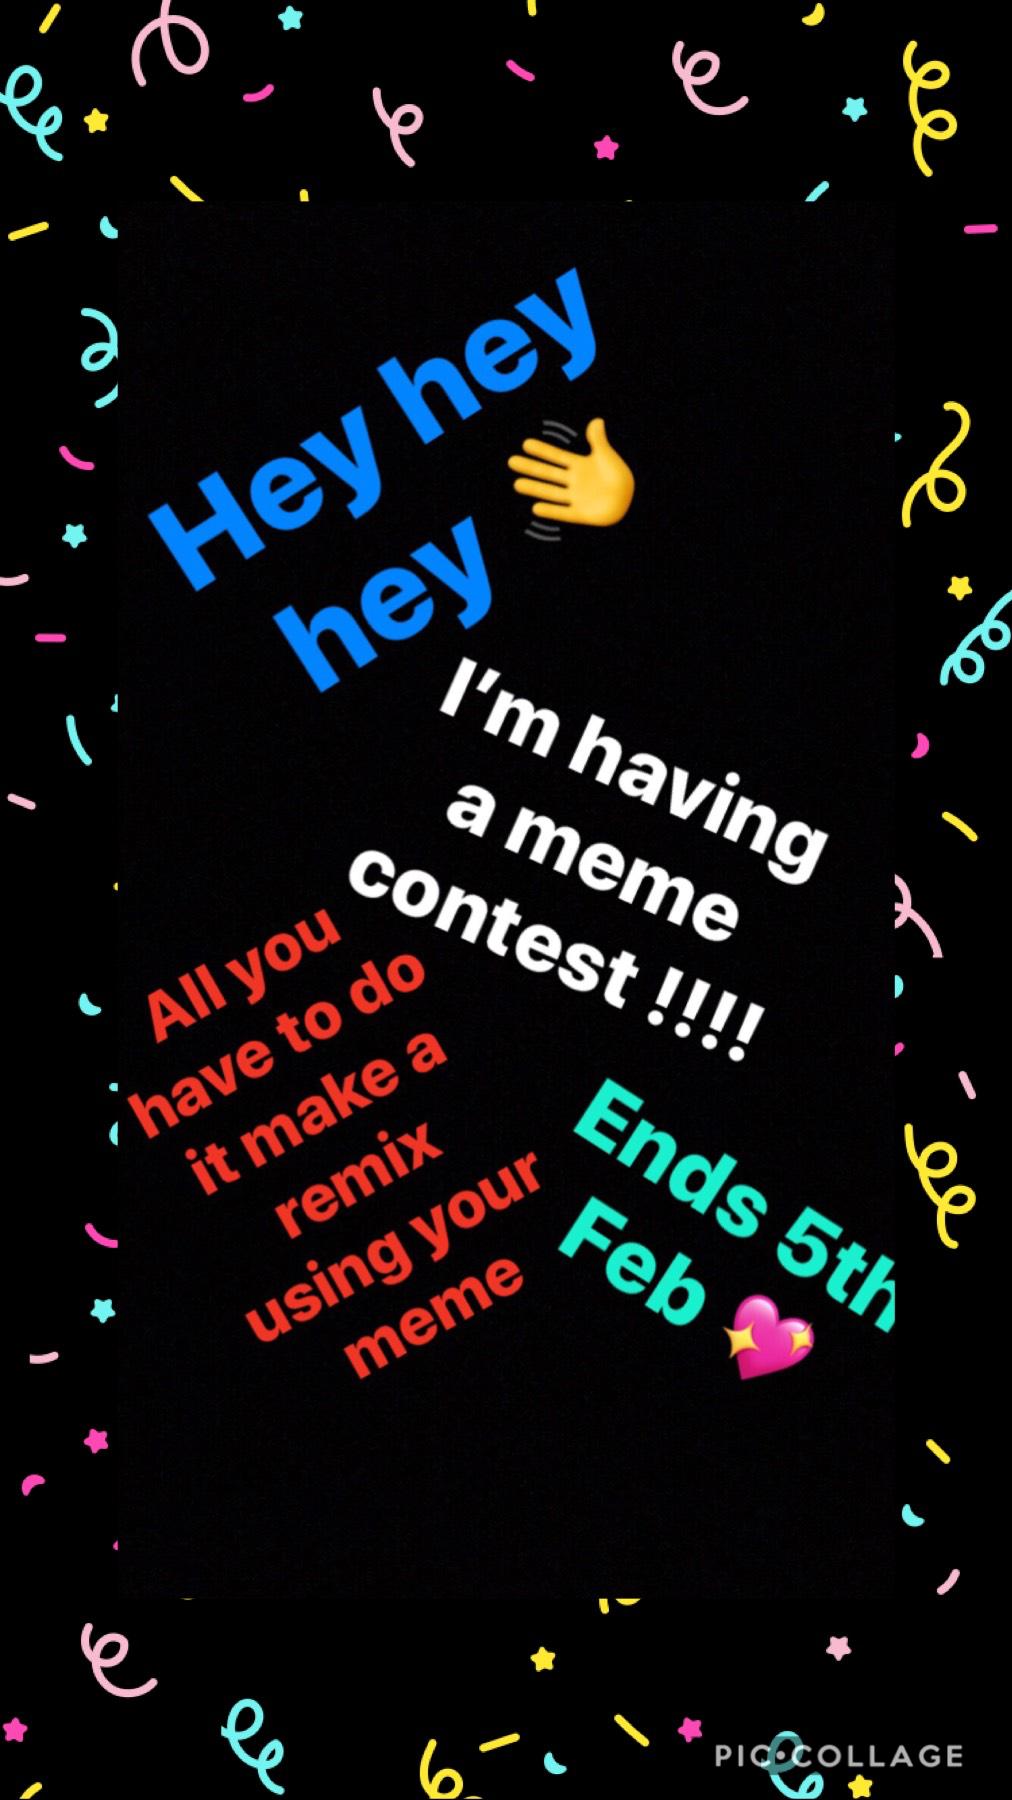 MEME CONTEST 💖💖💖Also promote my contest on your page pls xxx